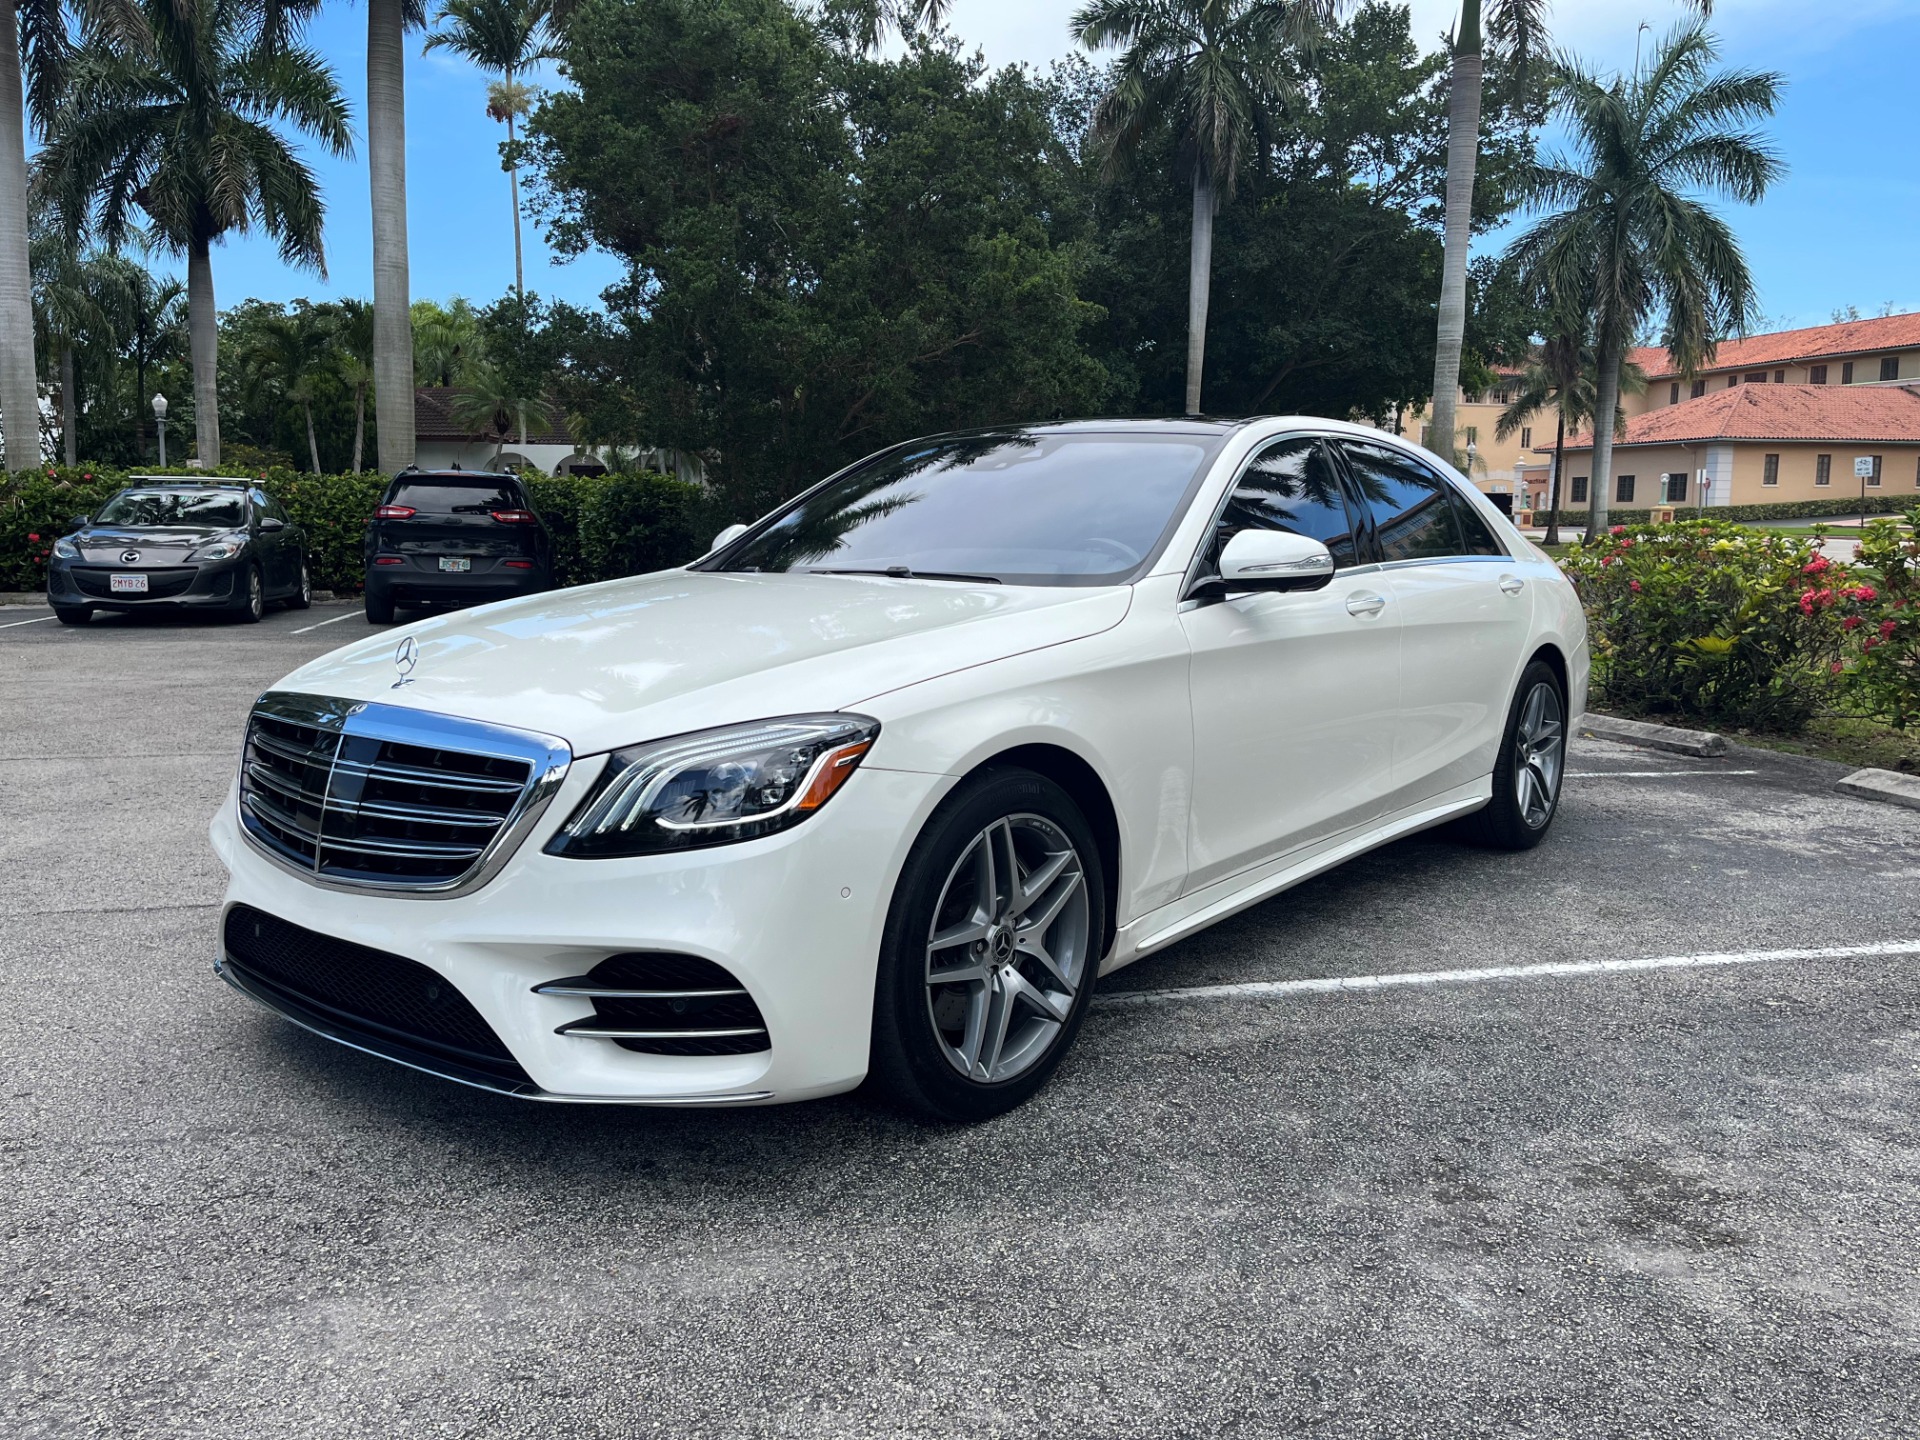 Used 2019 Mercedes-Benz S-Class S 560 4MATIC for sale Sold at The Gables Sports Cars in Miami FL 33146 3